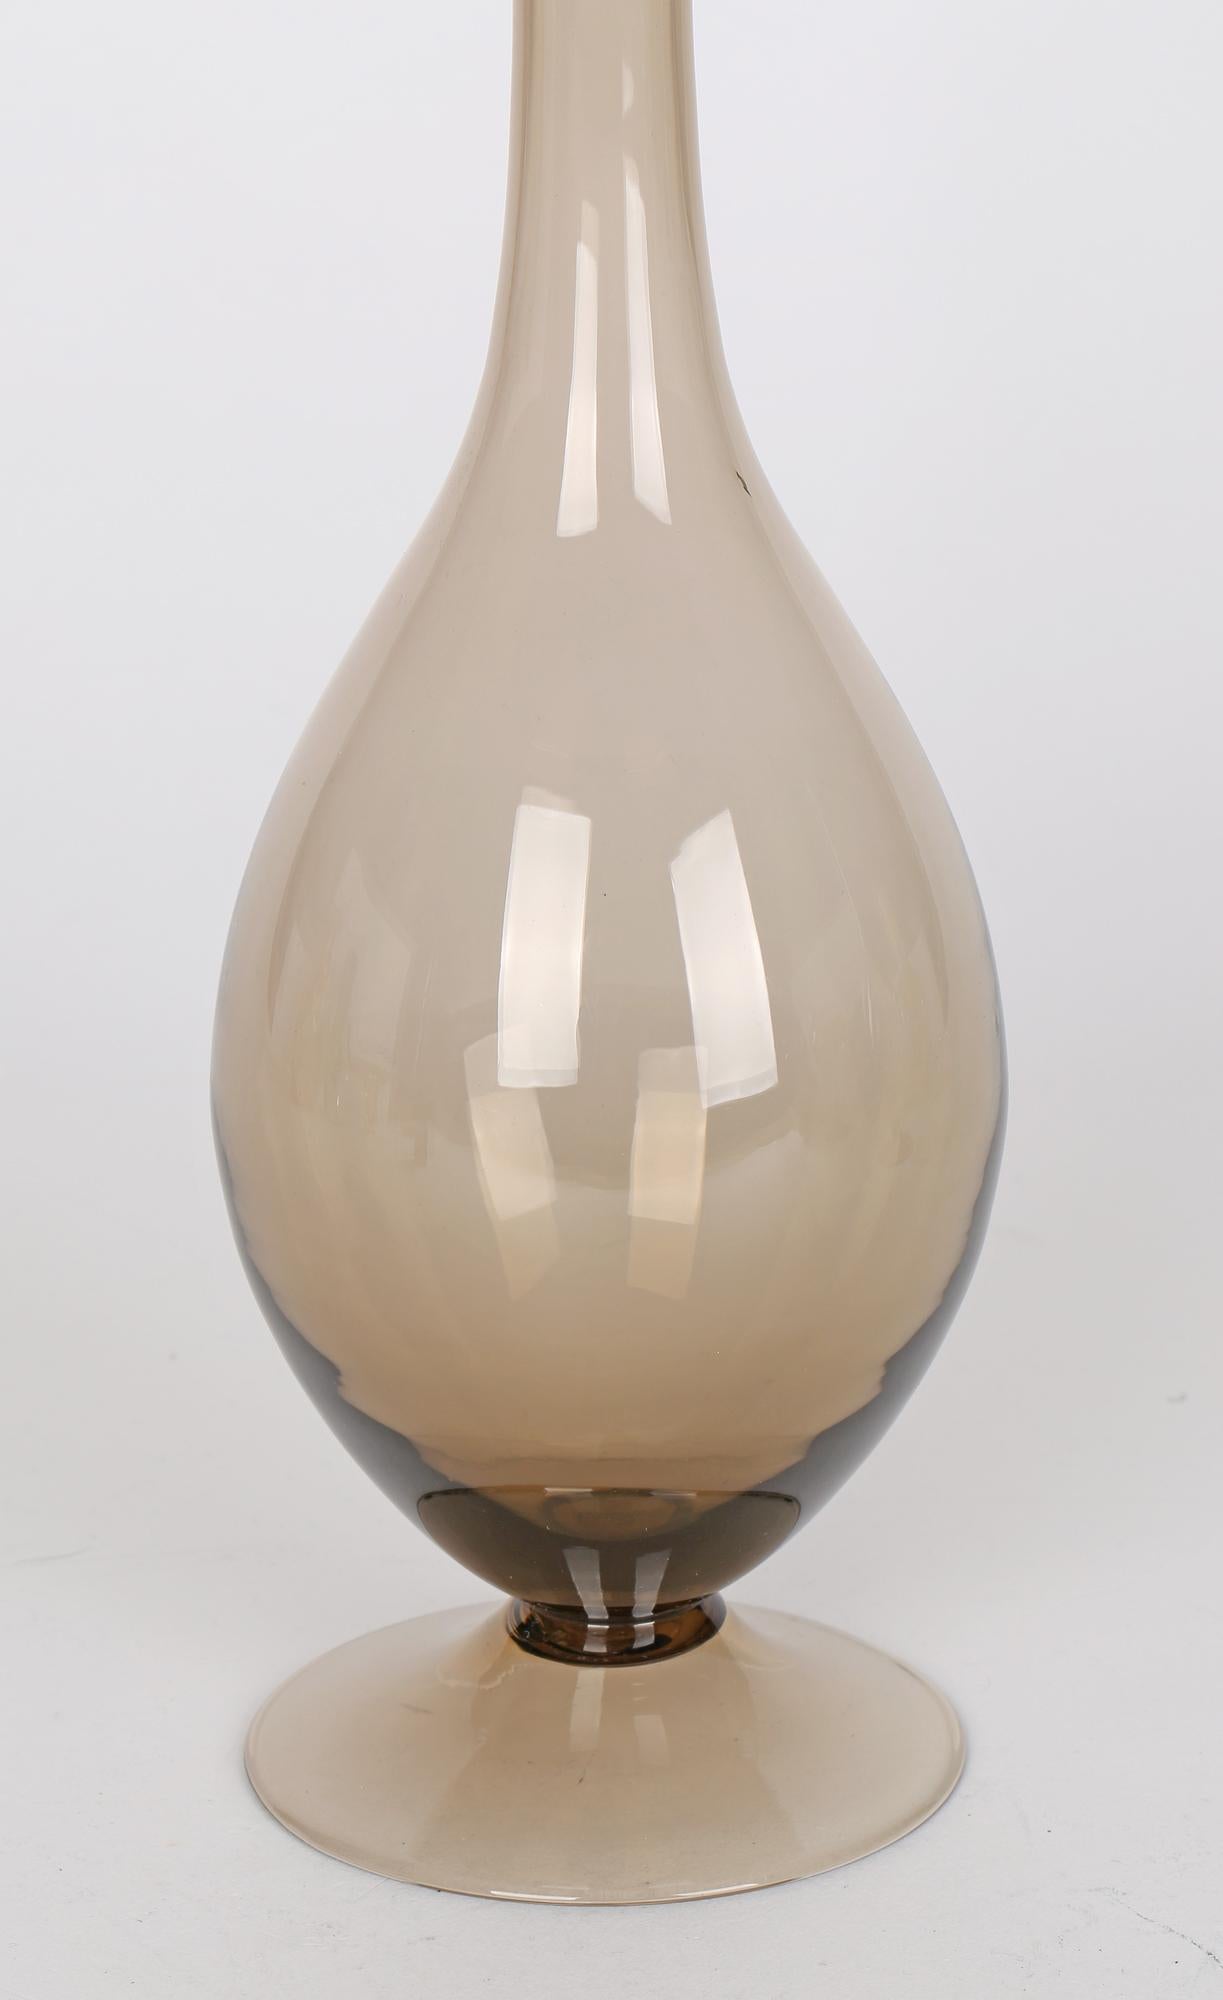 A very fine and elegant vintage Italian Murano Soffiato brown tinted glass decanter and stopper attributed to MVM Cappellin dating between 1930 and 1950. Typical in style and design of the work of renowned artist Vittorio Zecchin (Italian, 1878 –